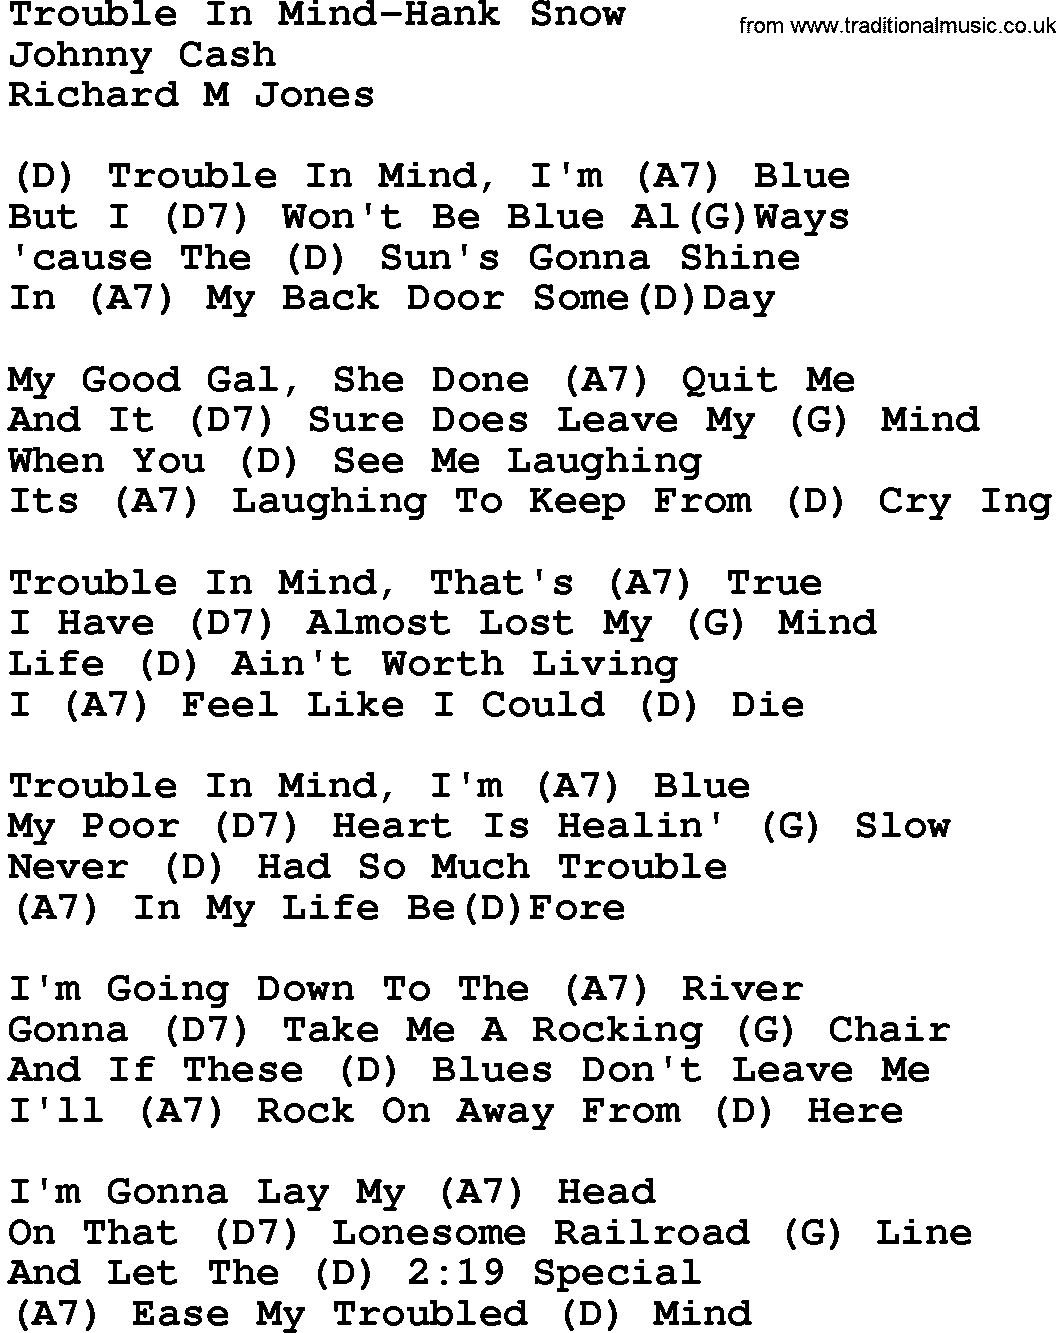 Country music song: Trouble In Mind-Hank Snow lyrics and chords